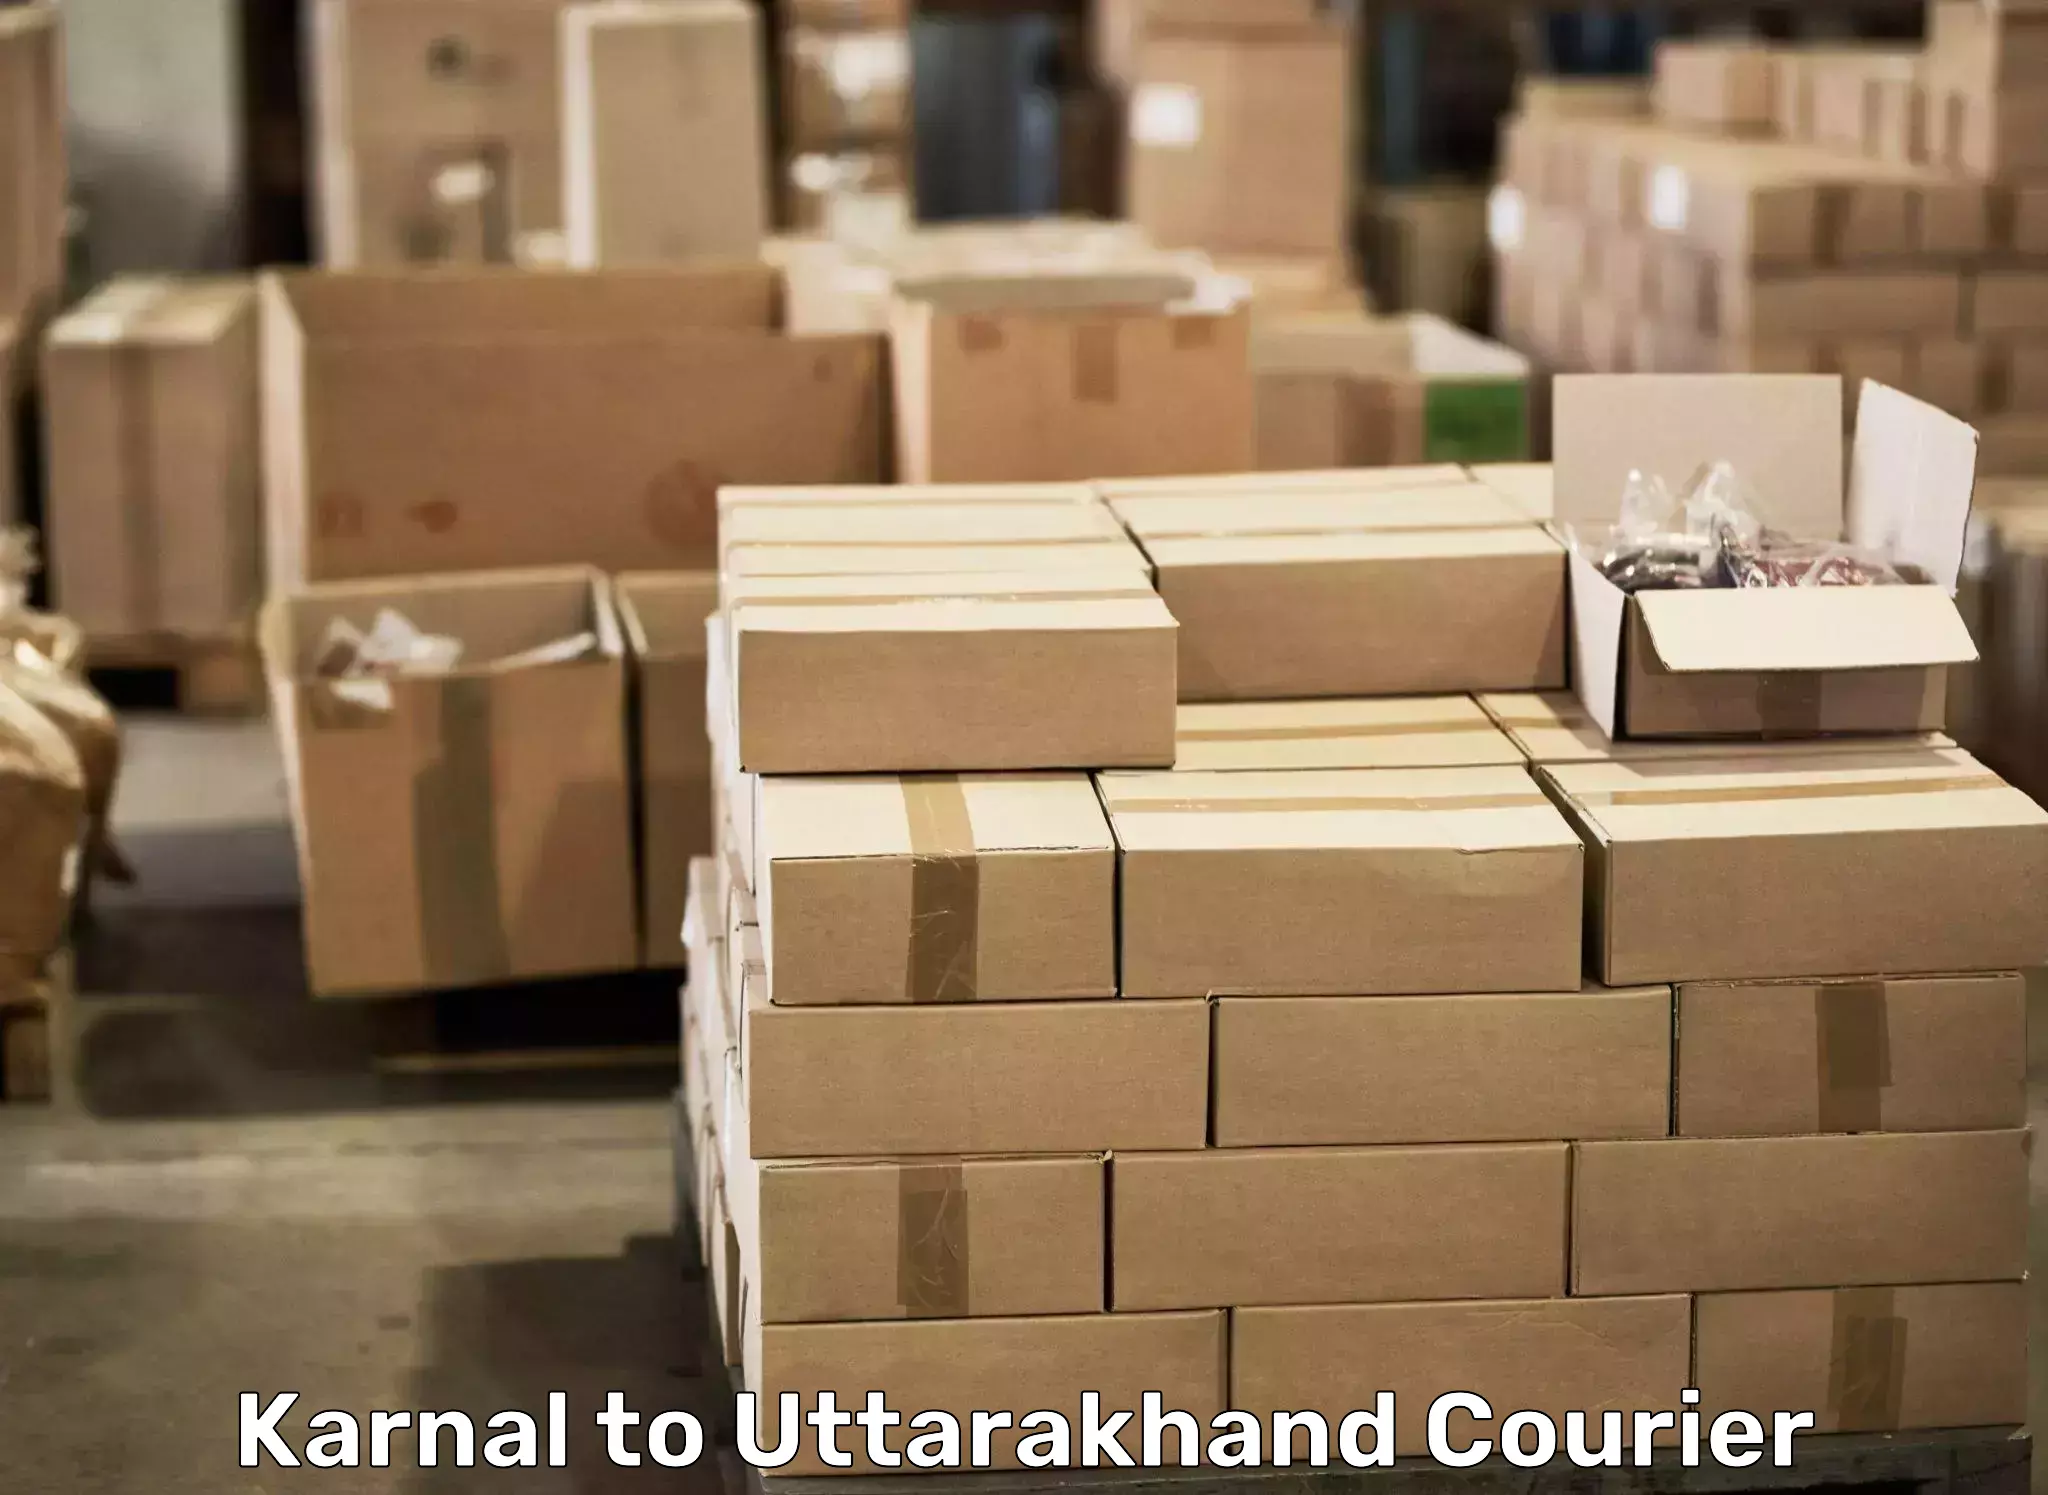 Professional movers and packers Karnal to Tehri Garhwal